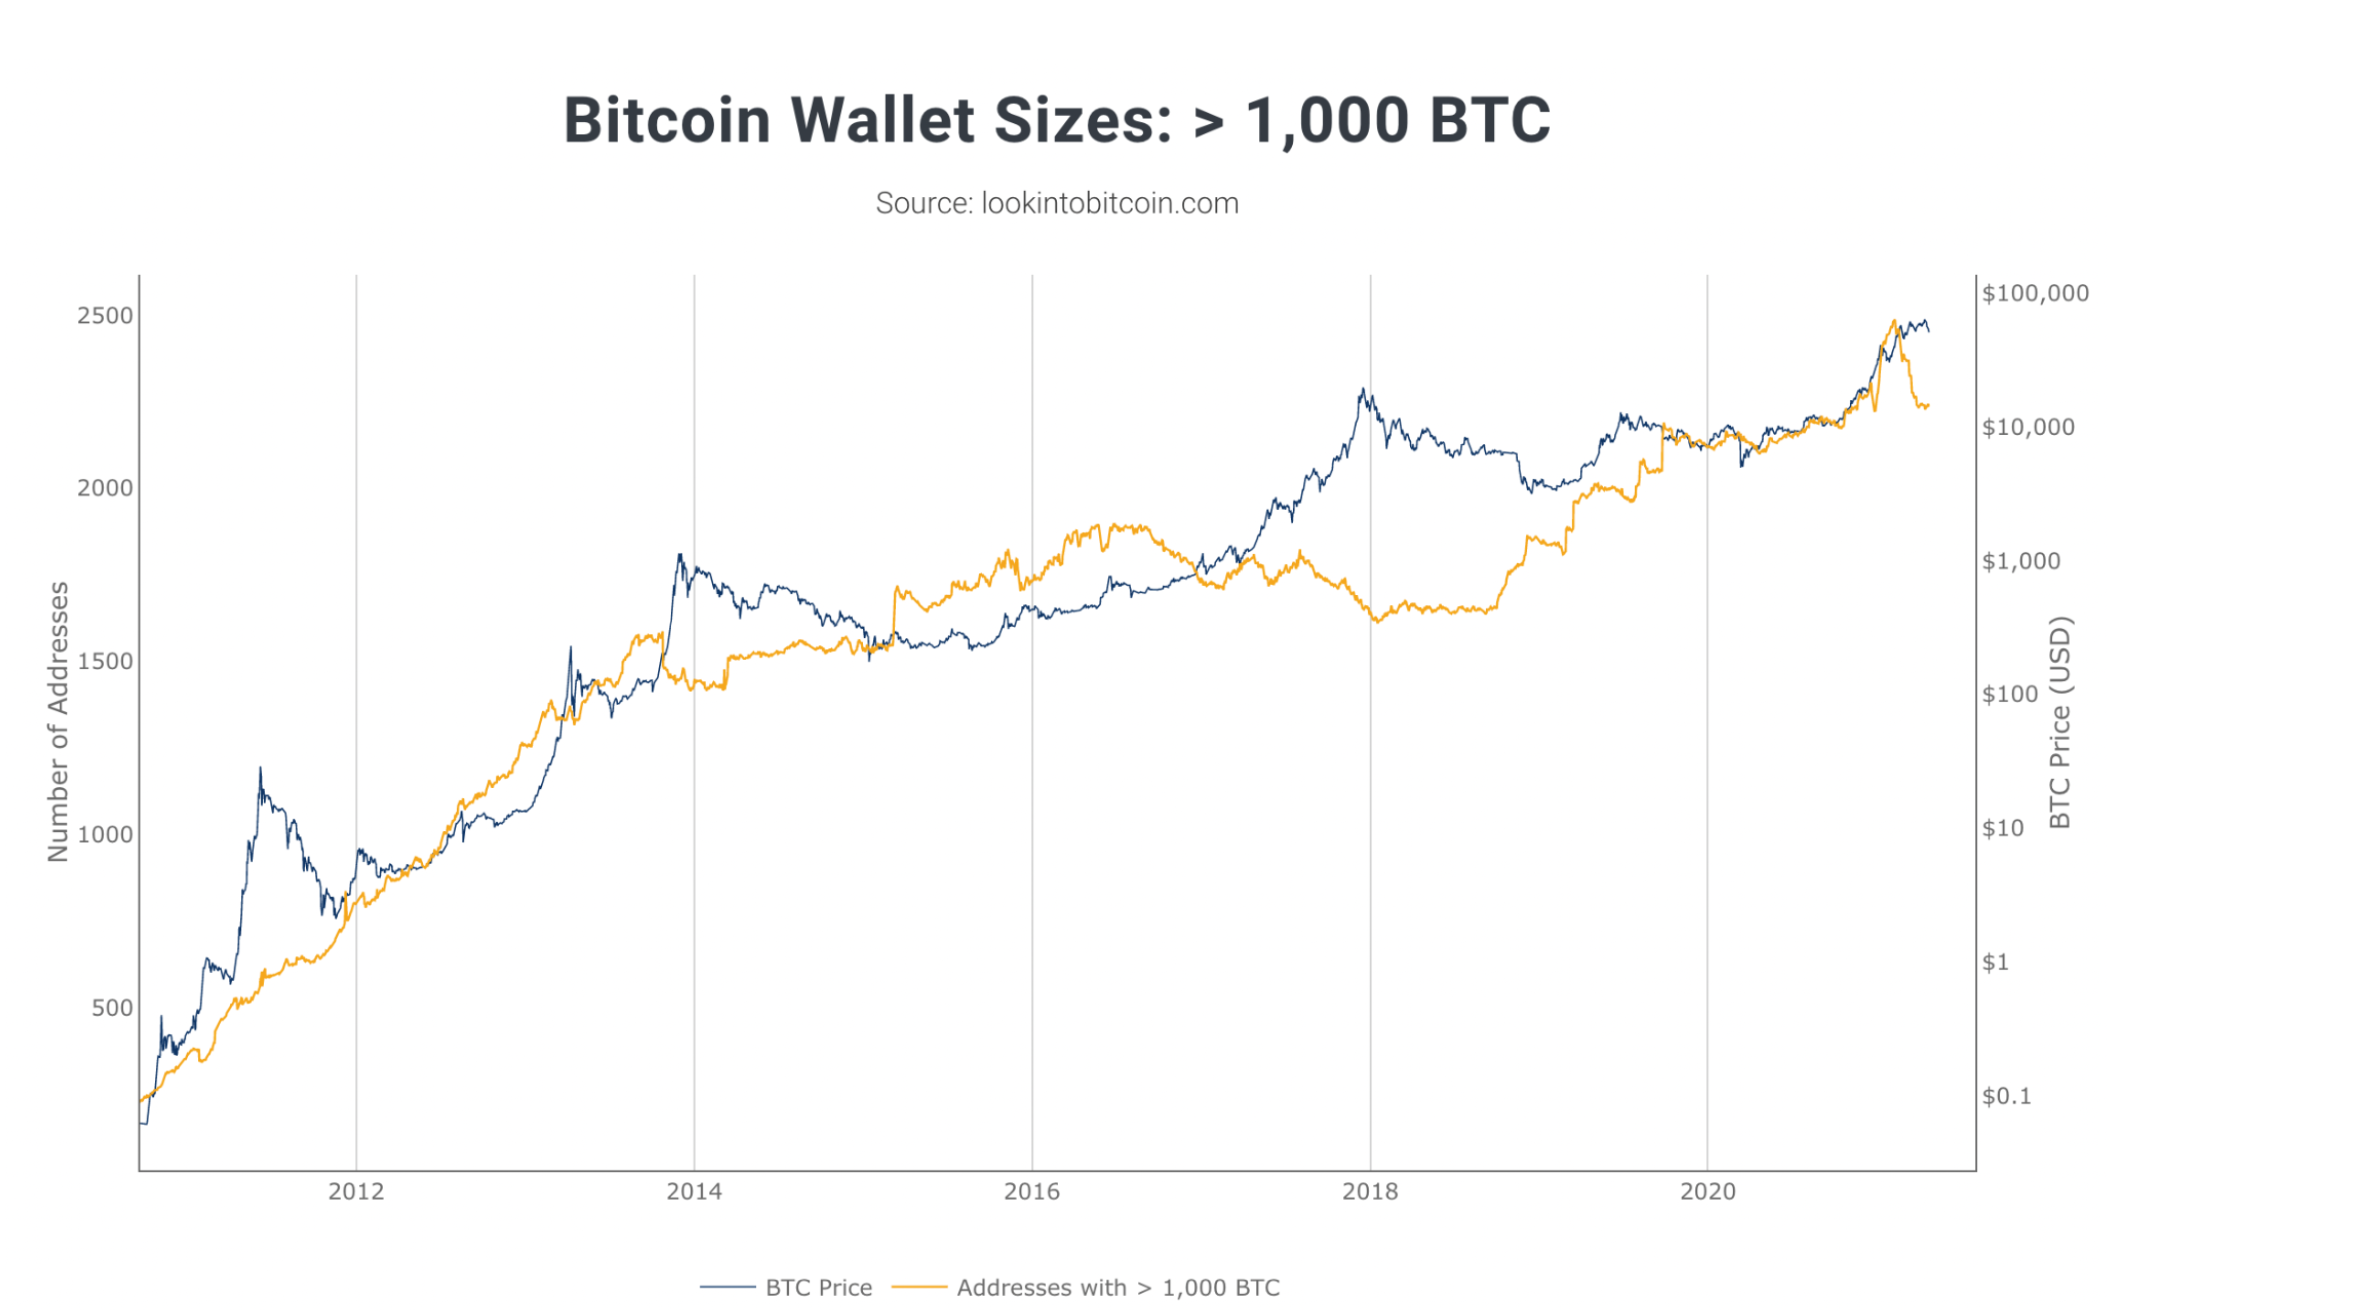 Graph of bitcoin wallet sizes vs BTC price. They are tightly correlated and grow expentially.